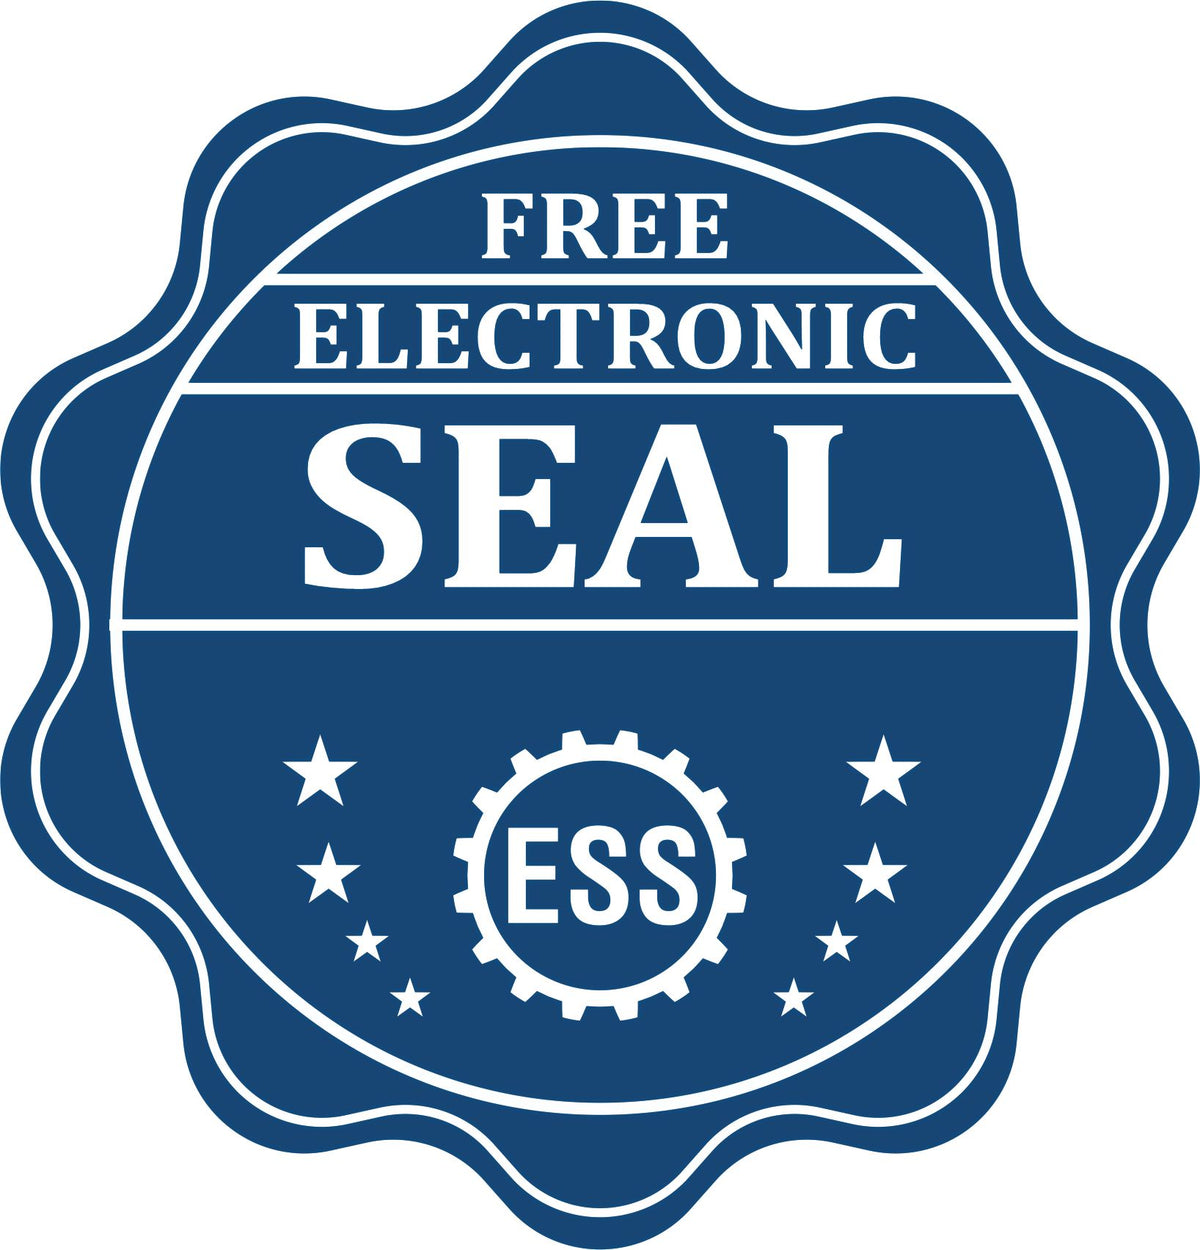 A badge showing a free electronic seal for the Heavy Duty Cast Iron Utah Geologist Seal Embosser with stars and the ESS gear on the emblem.